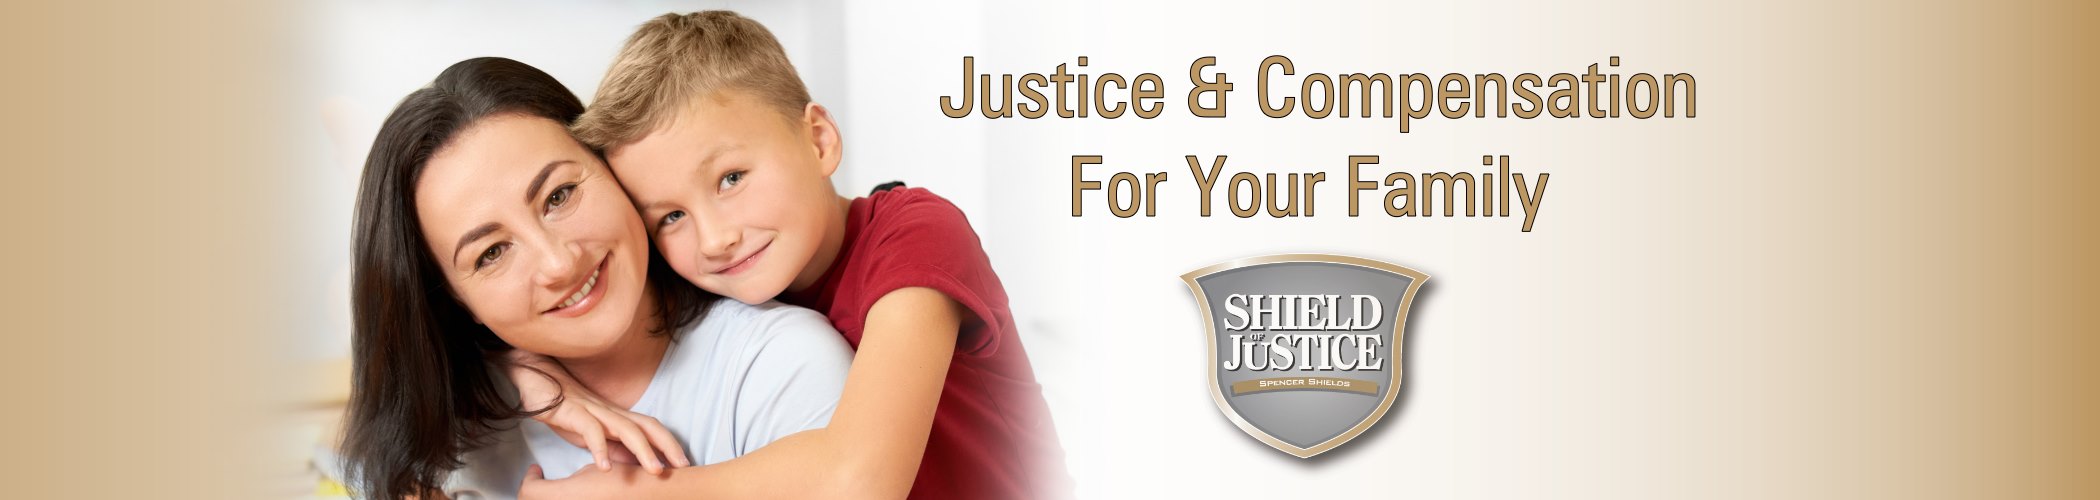 Justice and Compensation For Your Family - Attorney Spencer Shields